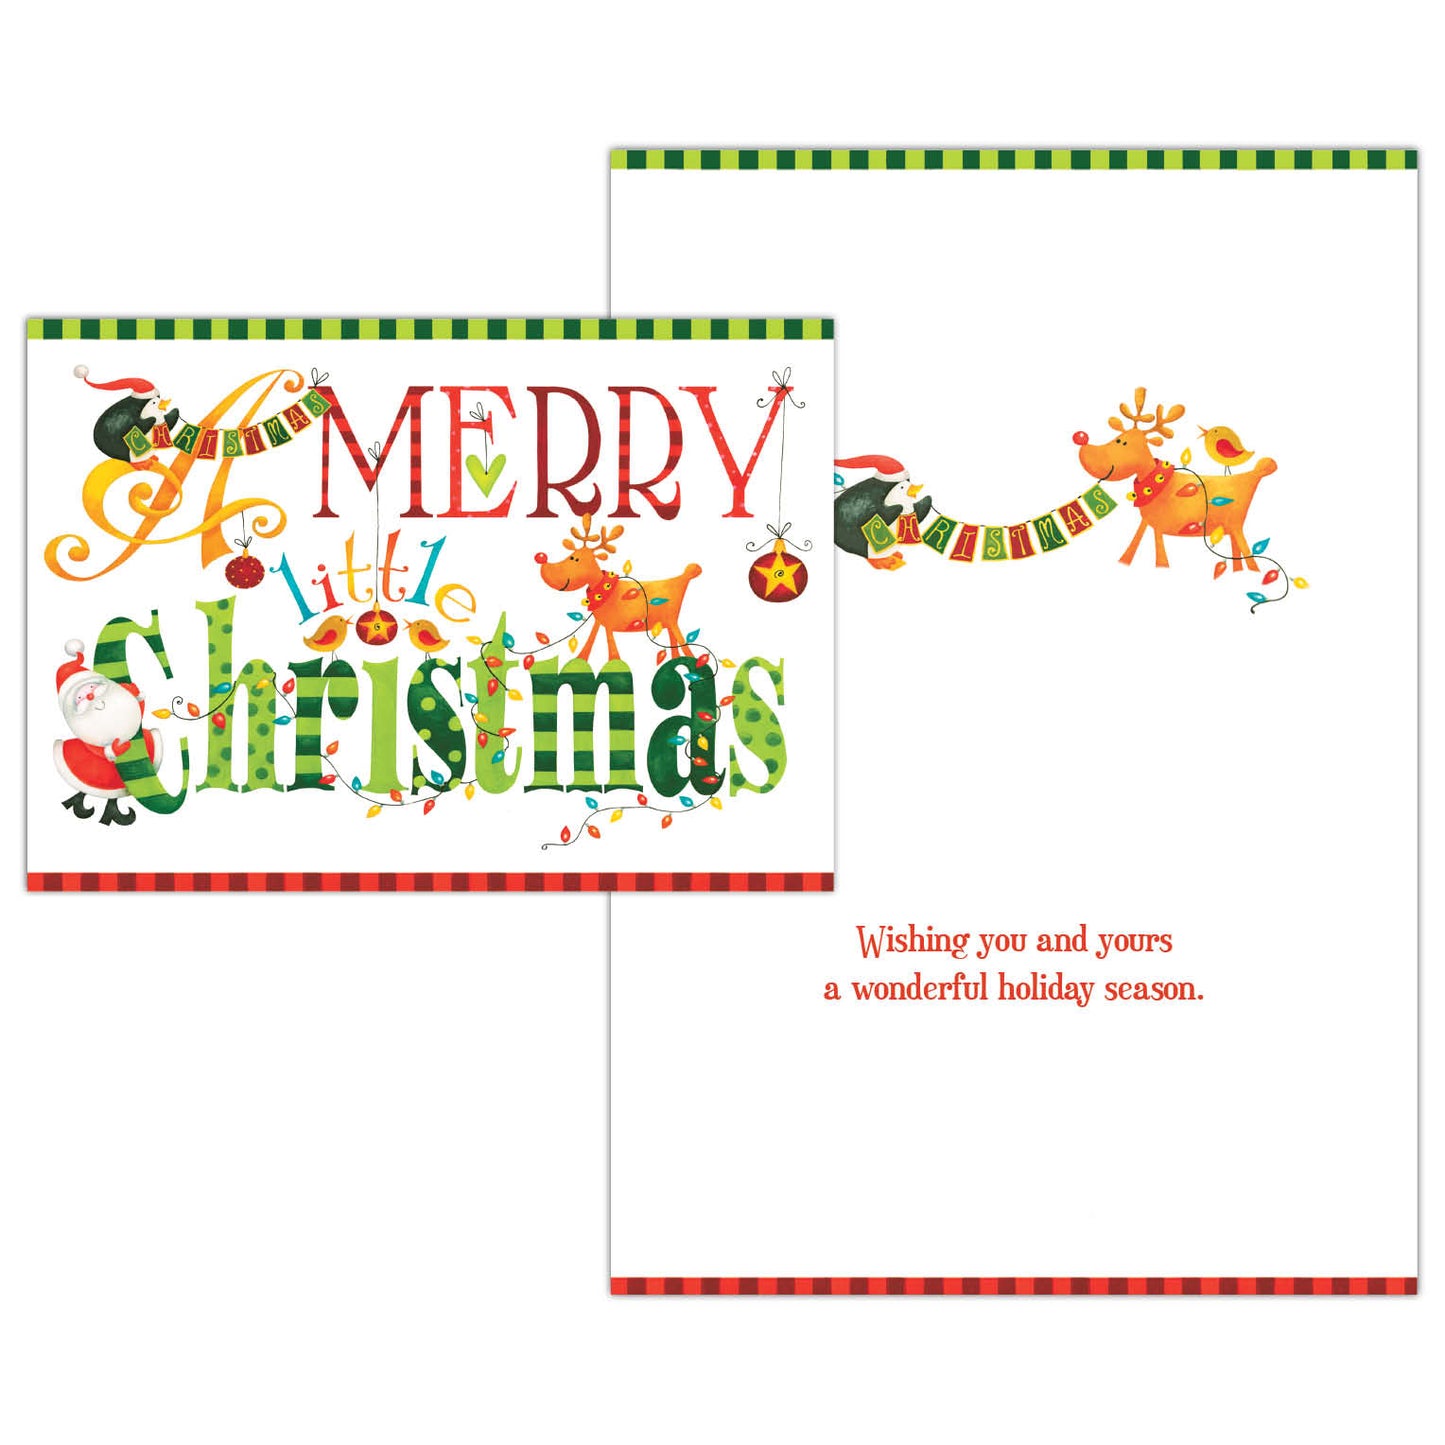 Merry Little Christmas - Boxed Christmas Cards